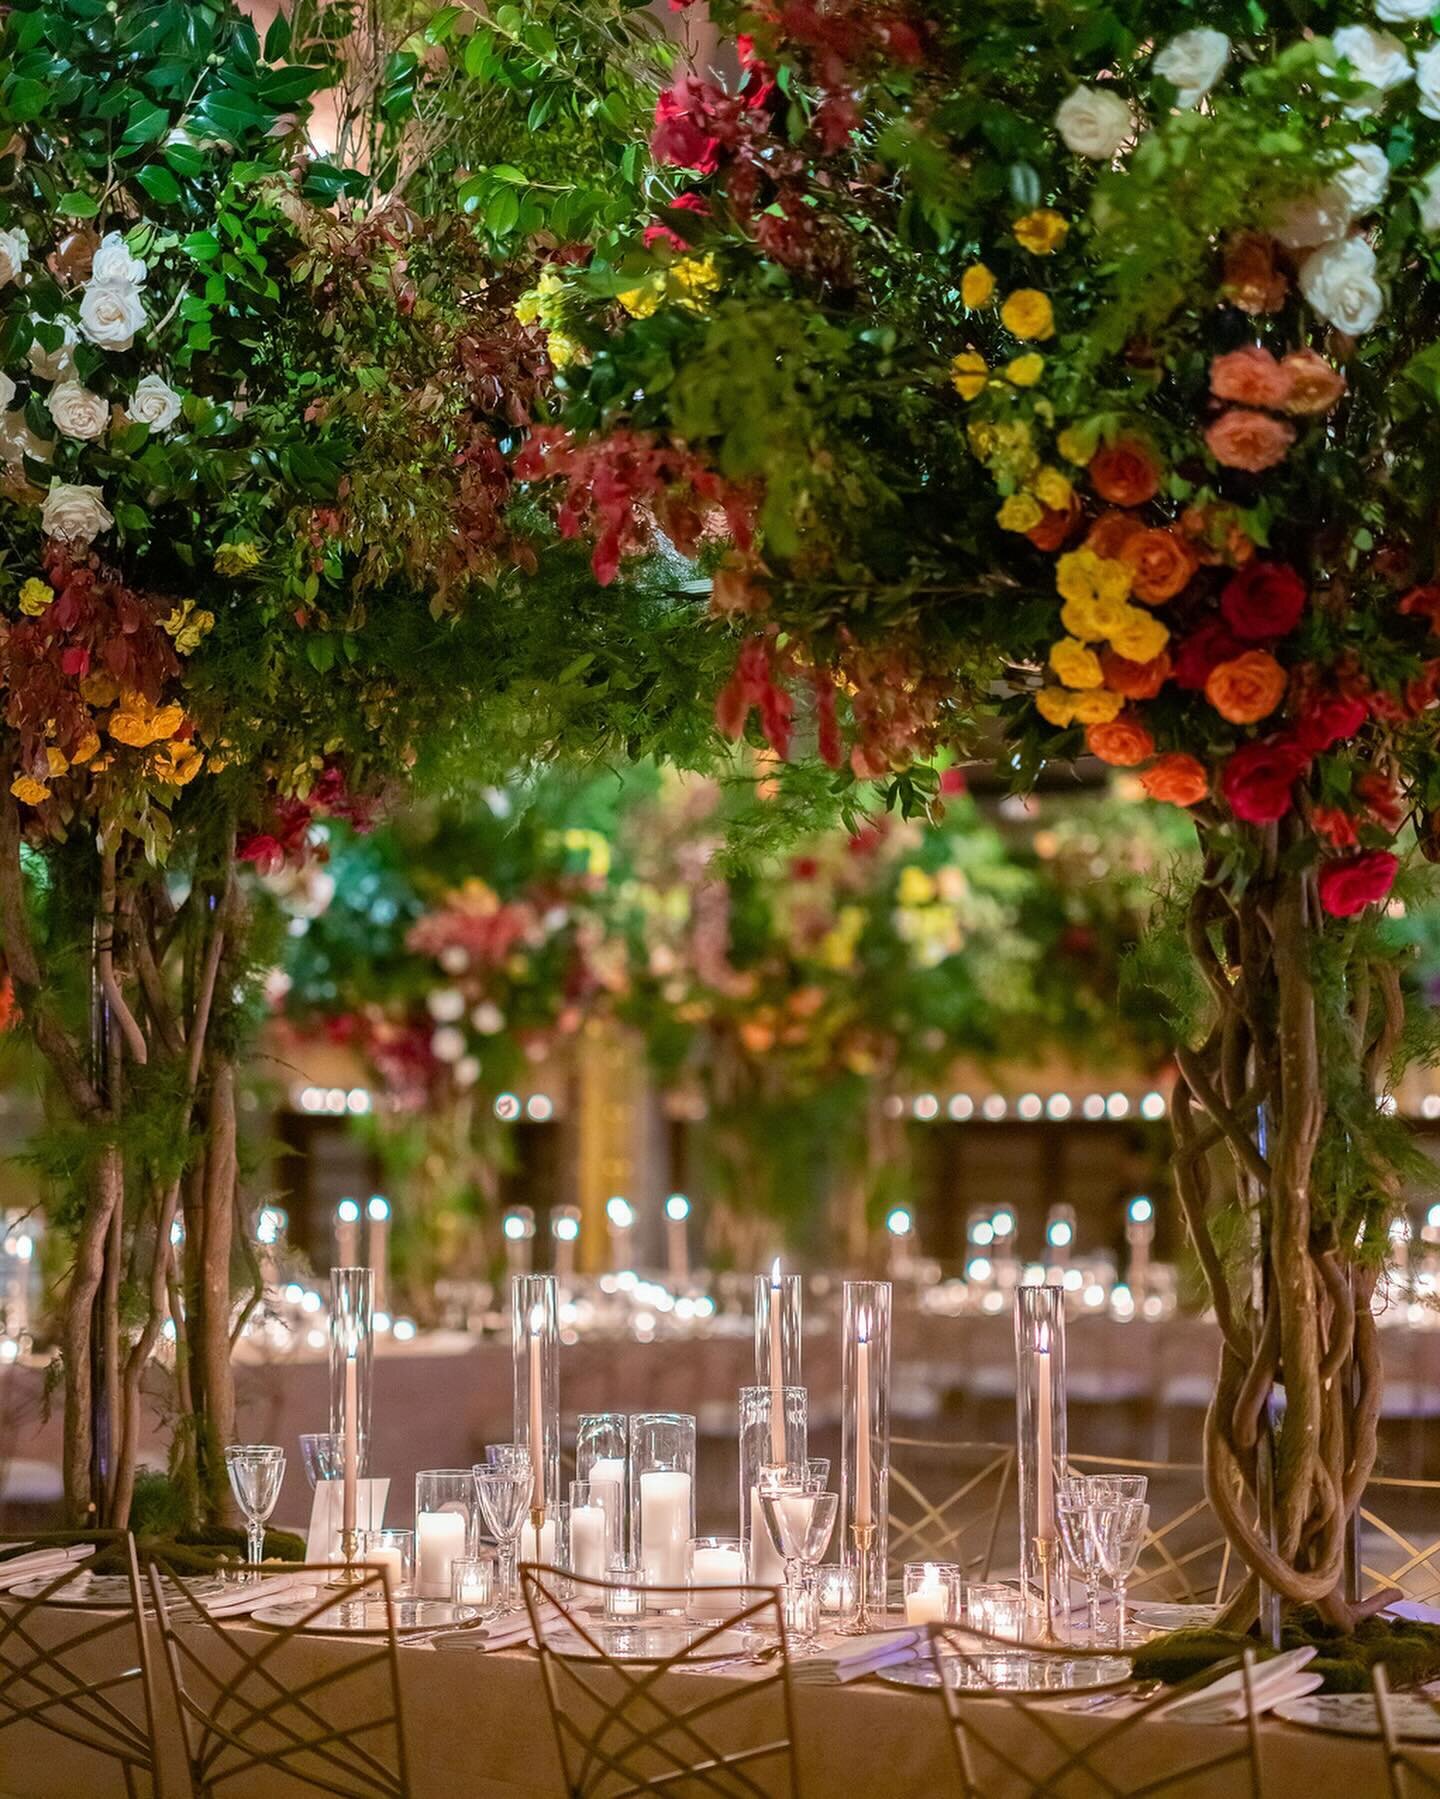 Months later, we're still thinking about these bold and bright blooms 🎨

Planning | @sidekickevents
Photo | @roeyyohaistudios
Venue | @nypl @nyplrentals
Catering | @olivierchengcatering
Chargers | @maisondecarine
Rentals | @luxeeventrentals
Dance Fl